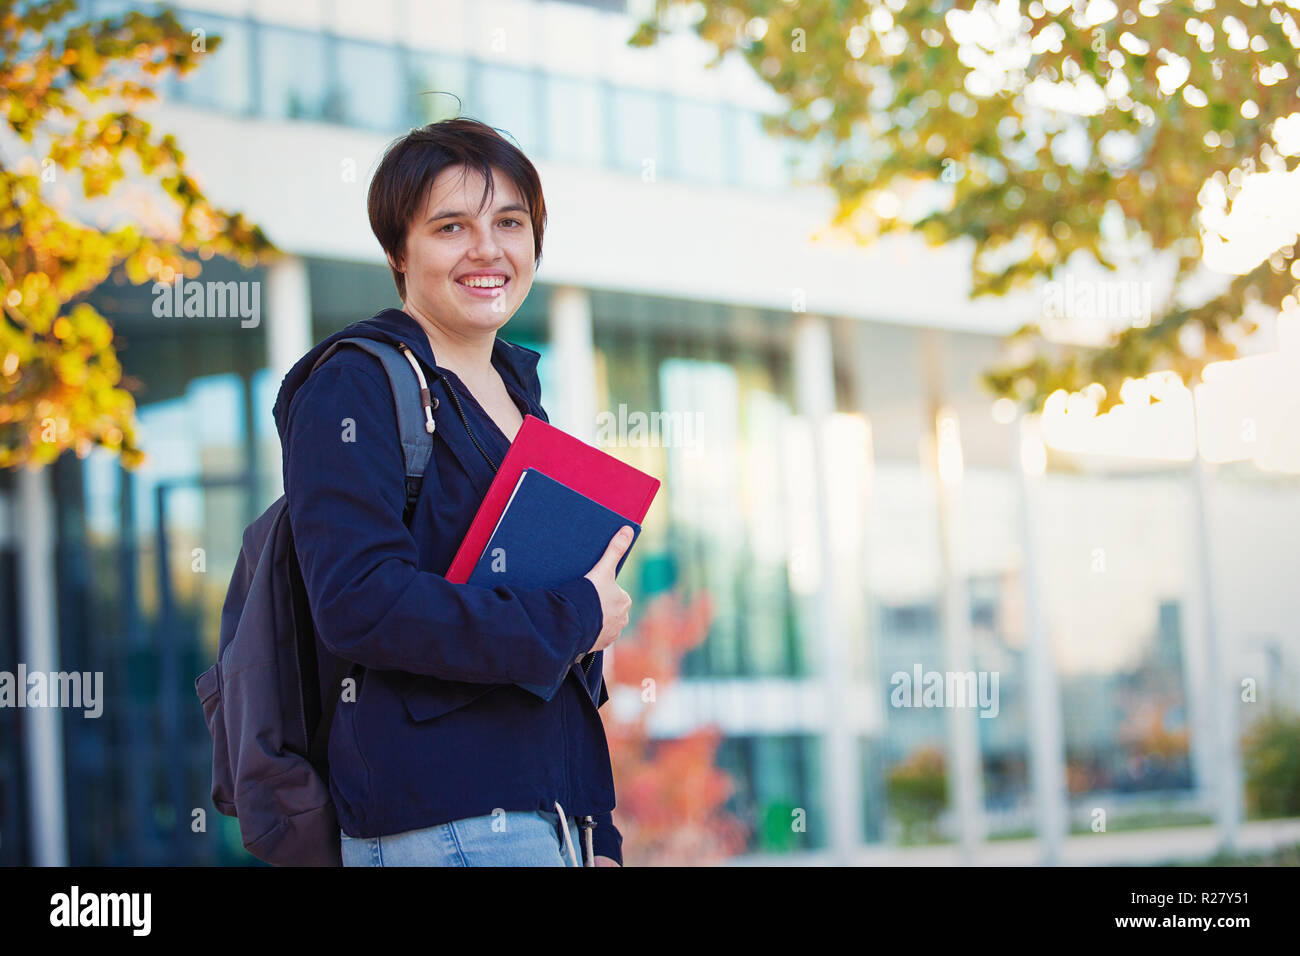 Young woman student holding books, autumn outdoors lifestyle portrait. Stock Photo